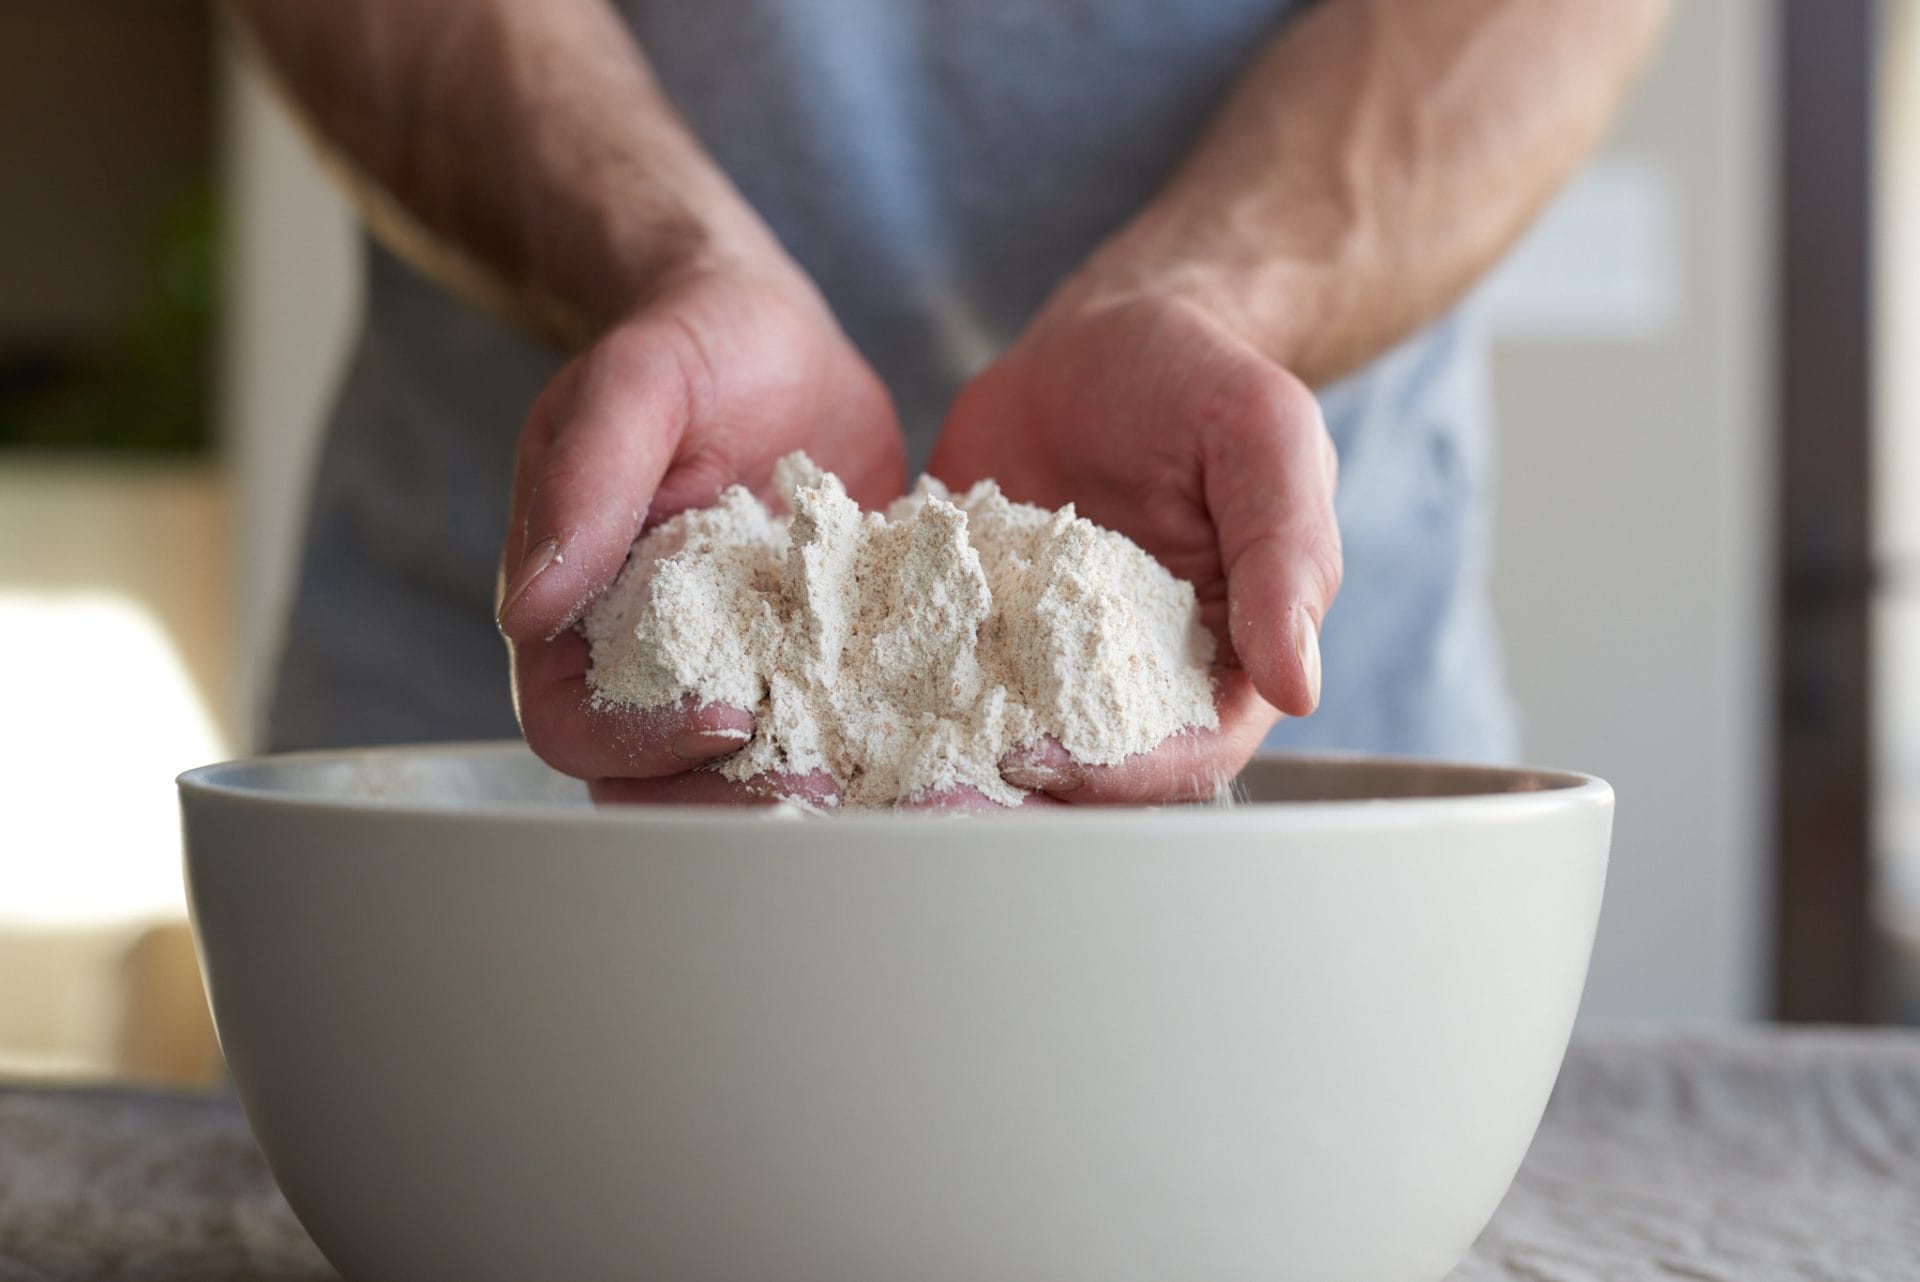 https://www.theperfectloaf.com/wp-content/uploads/2022/01/theperfectloaf_how_to_bake_with_freshly_milled_flour-1920x1282.jpg